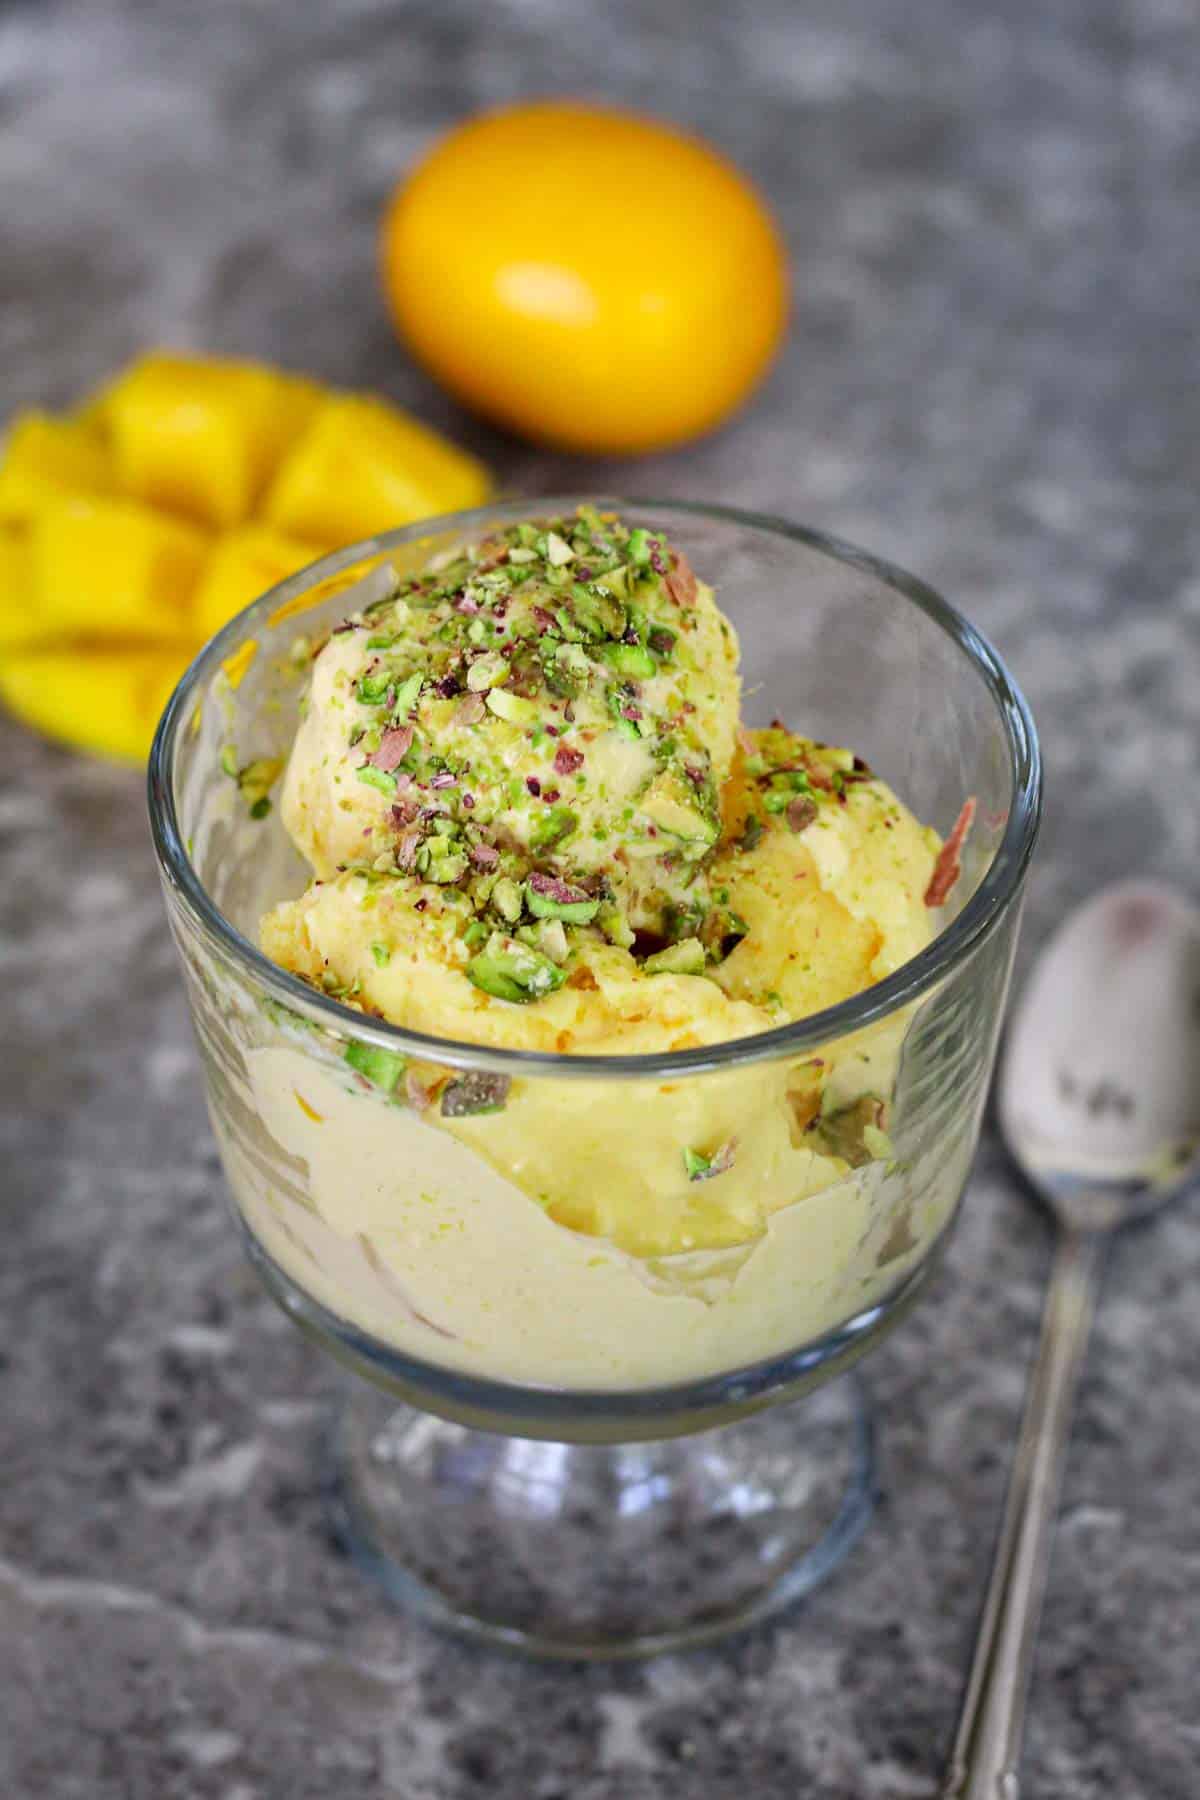 A serving cup with Mango and Meyer lemon gelato. Gelato is topped off with pistachios. You see more mangoes and lemons in the background.